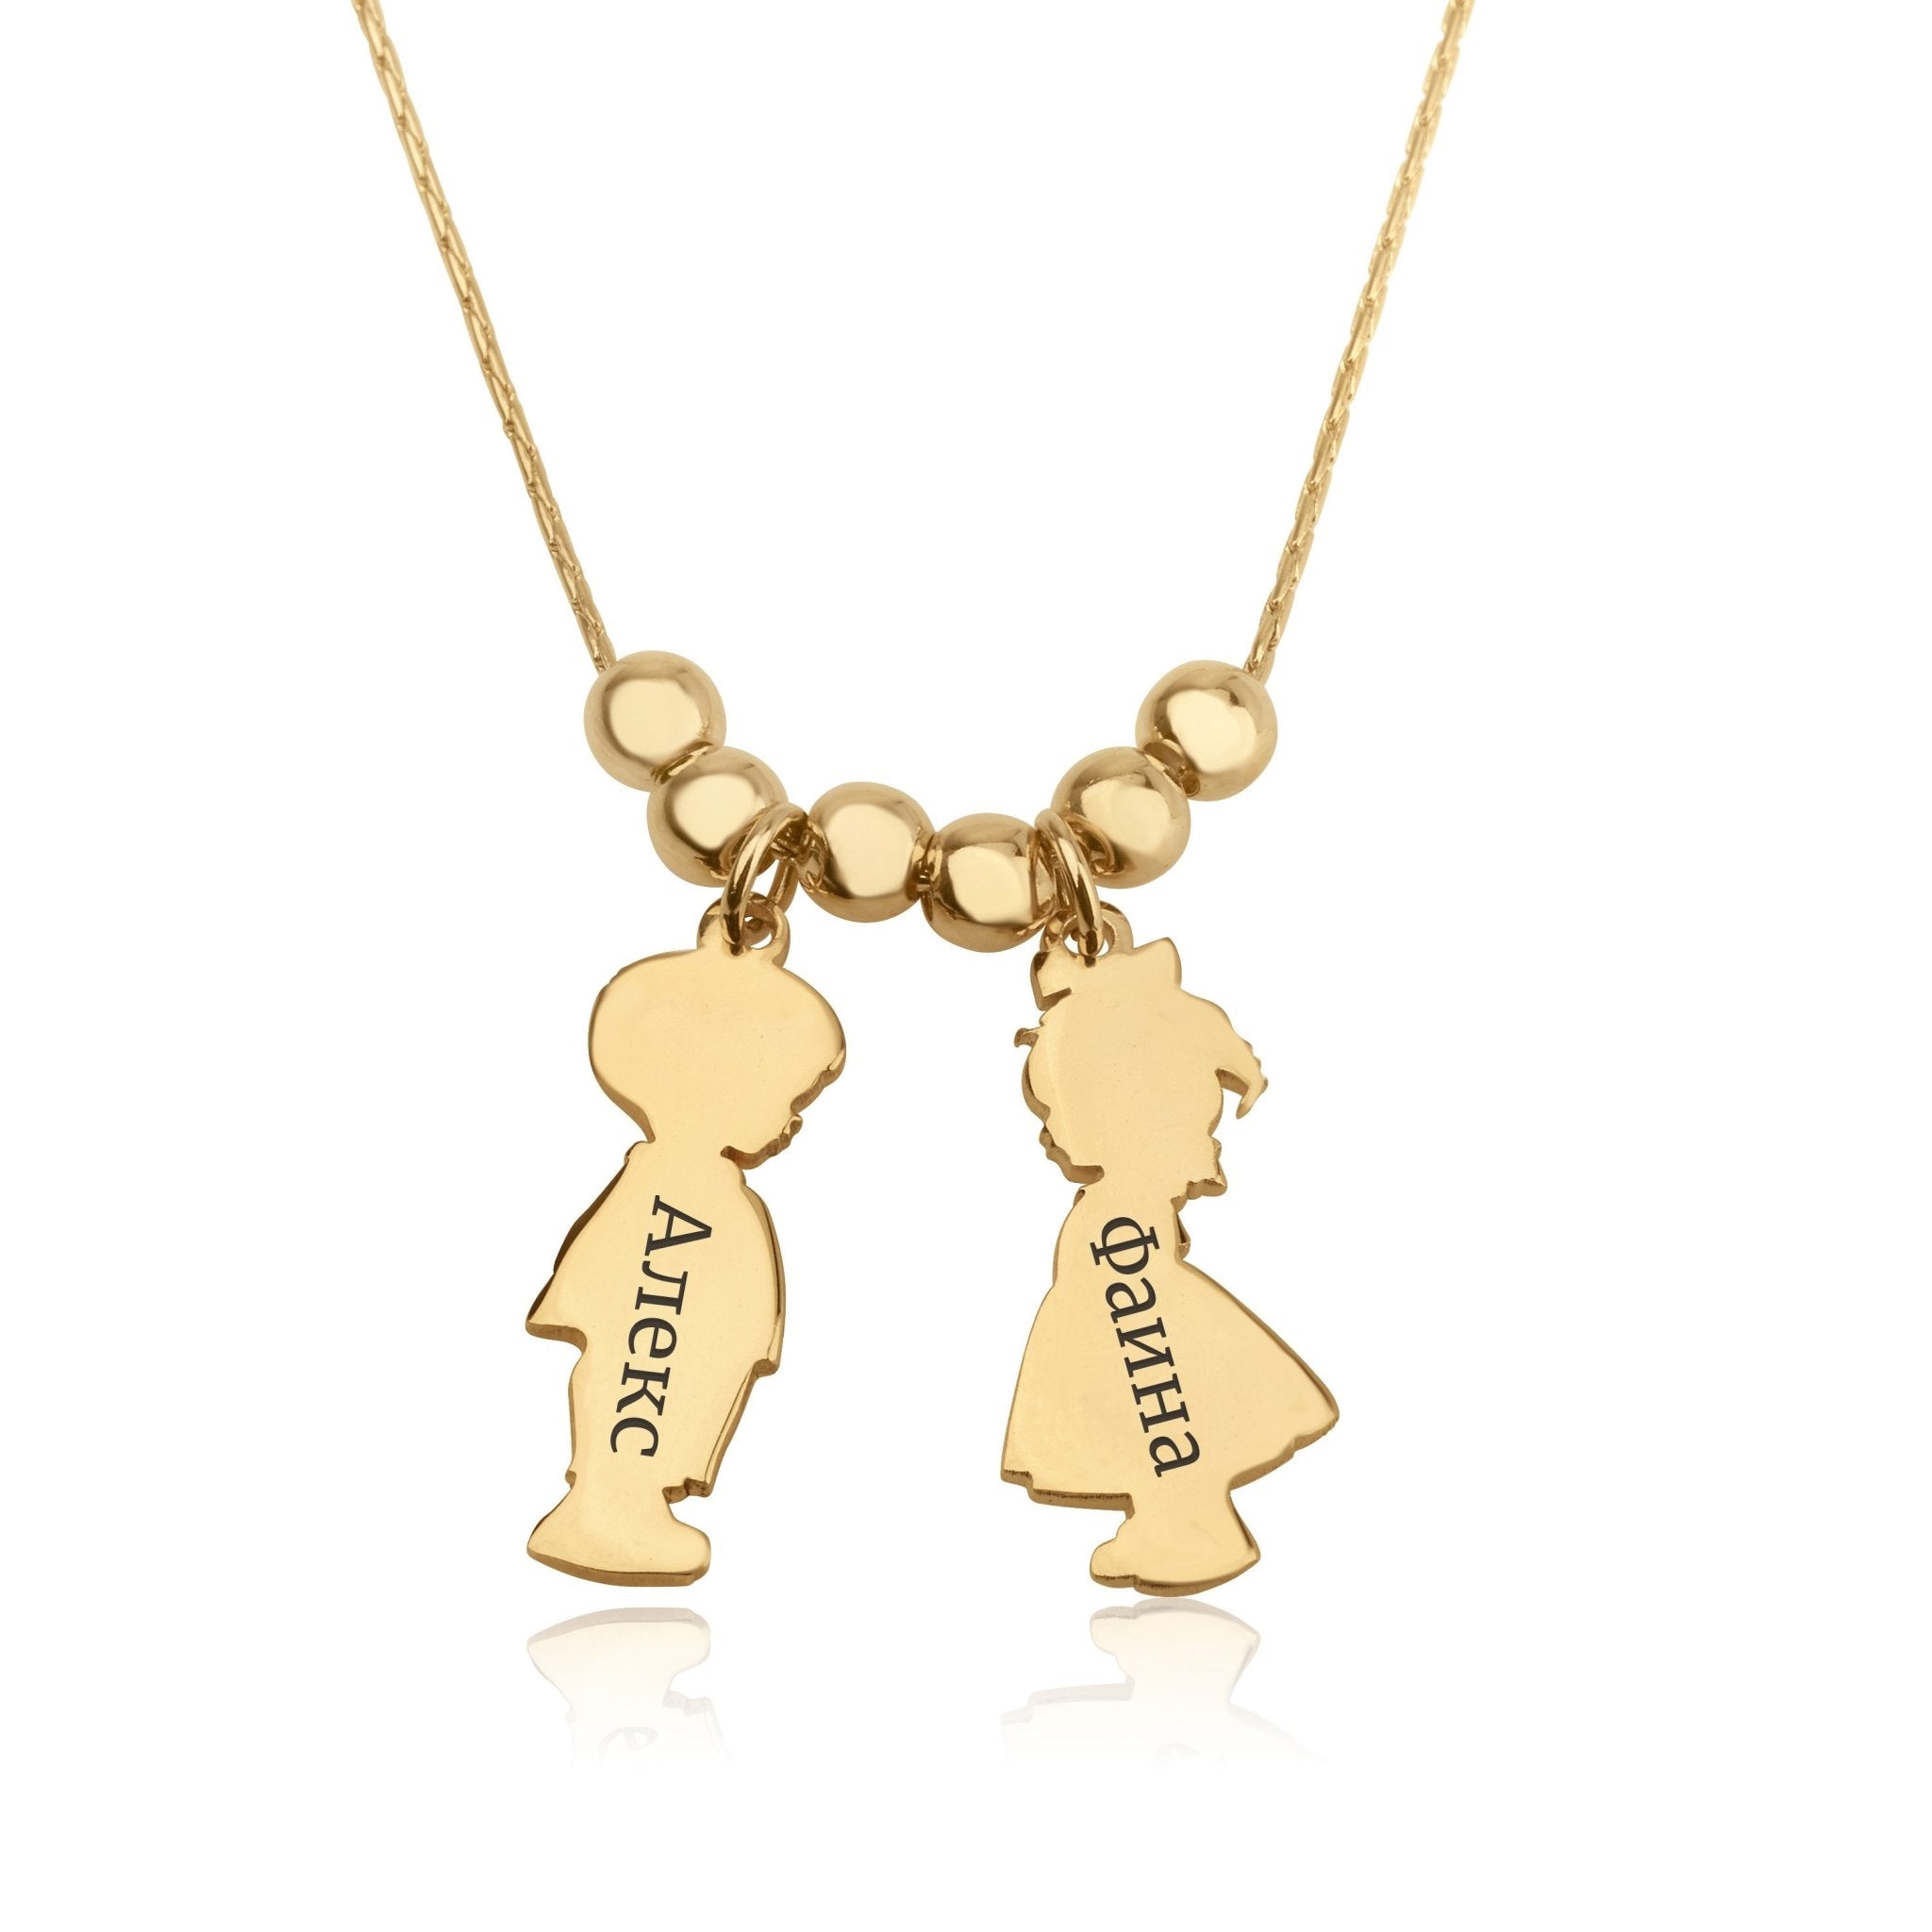 18K Gold Plated Kids Charms Family Necklace w Chain Boys n Girls